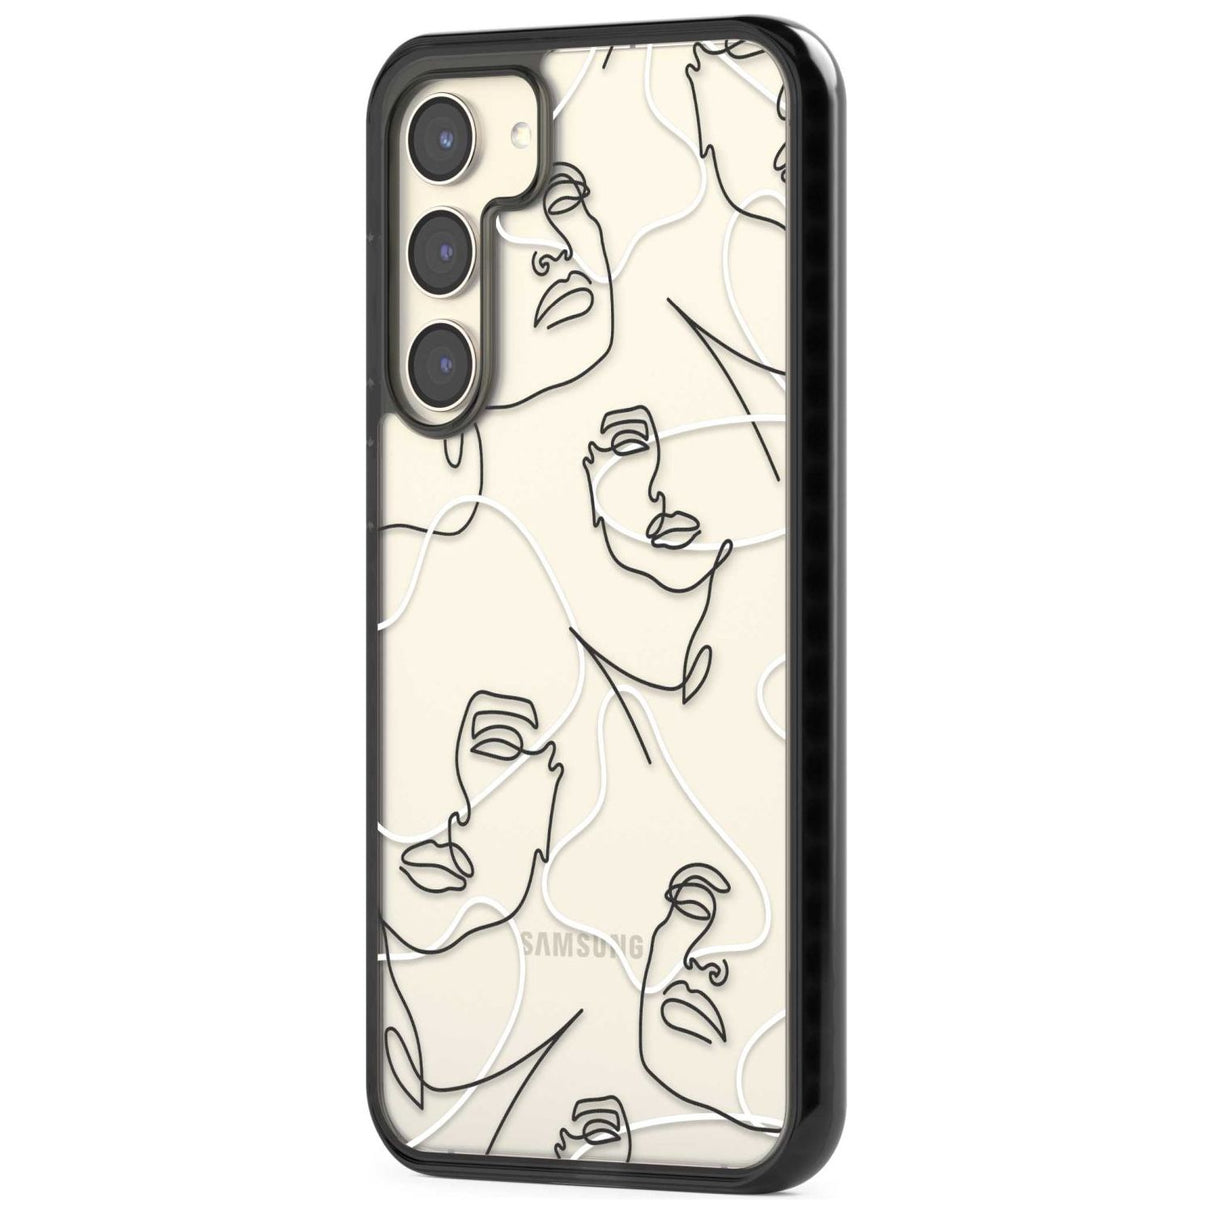 Personalised Abstract Faces Custom Phone Case iPhone 15 Pro Max / Black Impact Case,iPhone 15 Plus / Black Impact Case,iPhone 15 Pro / Black Impact Case,iPhone 15 / Black Impact Case,iPhone 15 Pro Max / Impact Case,iPhone 15 Plus / Impact Case,iPhone 15 Pro / Impact Case,iPhone 15 / Impact Case,iPhone 15 Pro Max / Magsafe Black Impact Case,iPhone 15 Plus / Magsafe Black Impact Case,iPhone 15 Pro / Magsafe Black Impact Case,iPhone 15 / Magsafe Black Impact Case,iPhone 14 Pro Max / Black Impact Case,iPhone 14